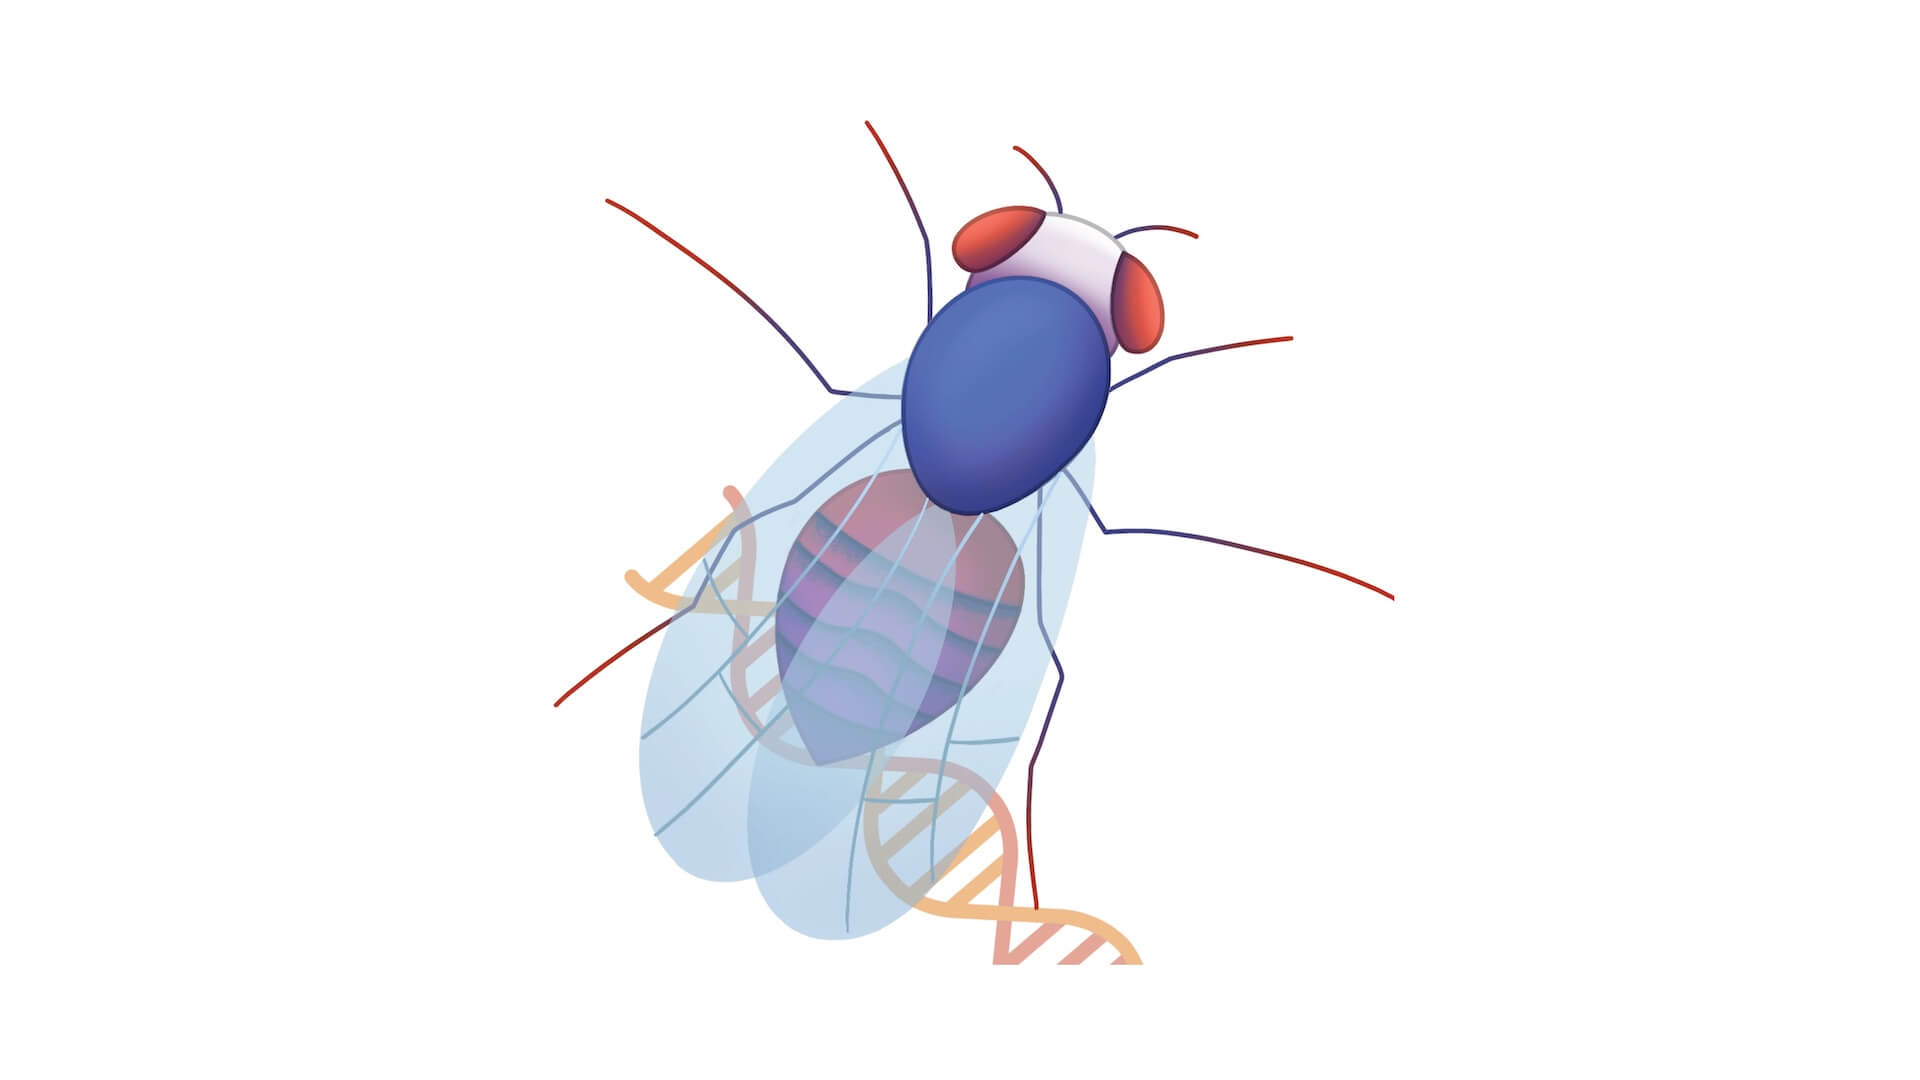 http://characterize%20immune-related%20micropeptides%20in%20humans%20and%20in%20fruit%20flies